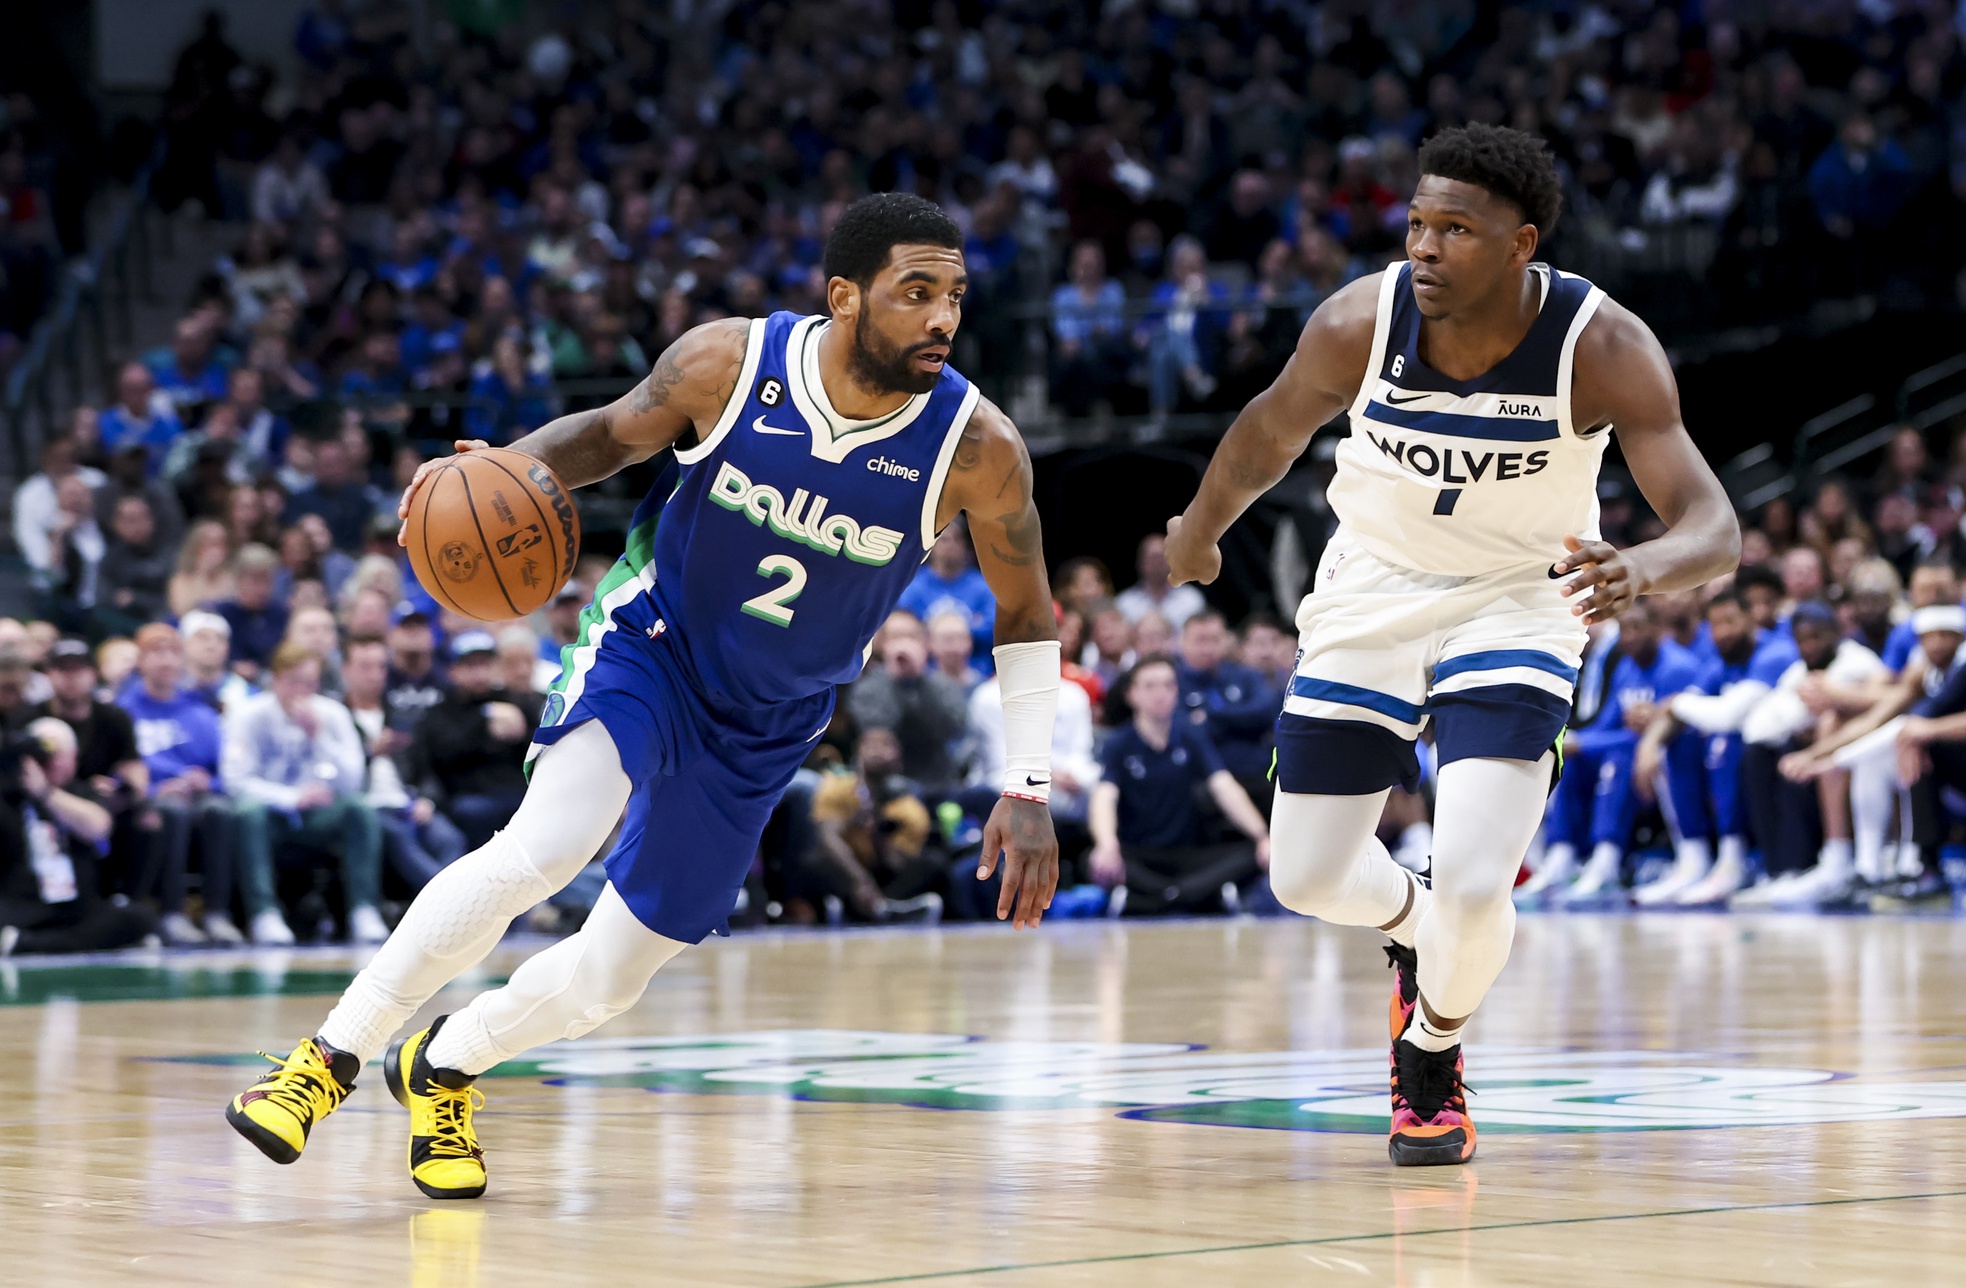 Feb 13, 2023; Dallas, Texas, USA; Dallas Mavericks guard Kyrie Irving (2) drives to the basket as Minnesota Timberwolves guard Anthony Edwards (1) defends during the fourth quarter at American Airlines Center. Mandatory Credit: Kevin Jairaj-USA TODAY Sports